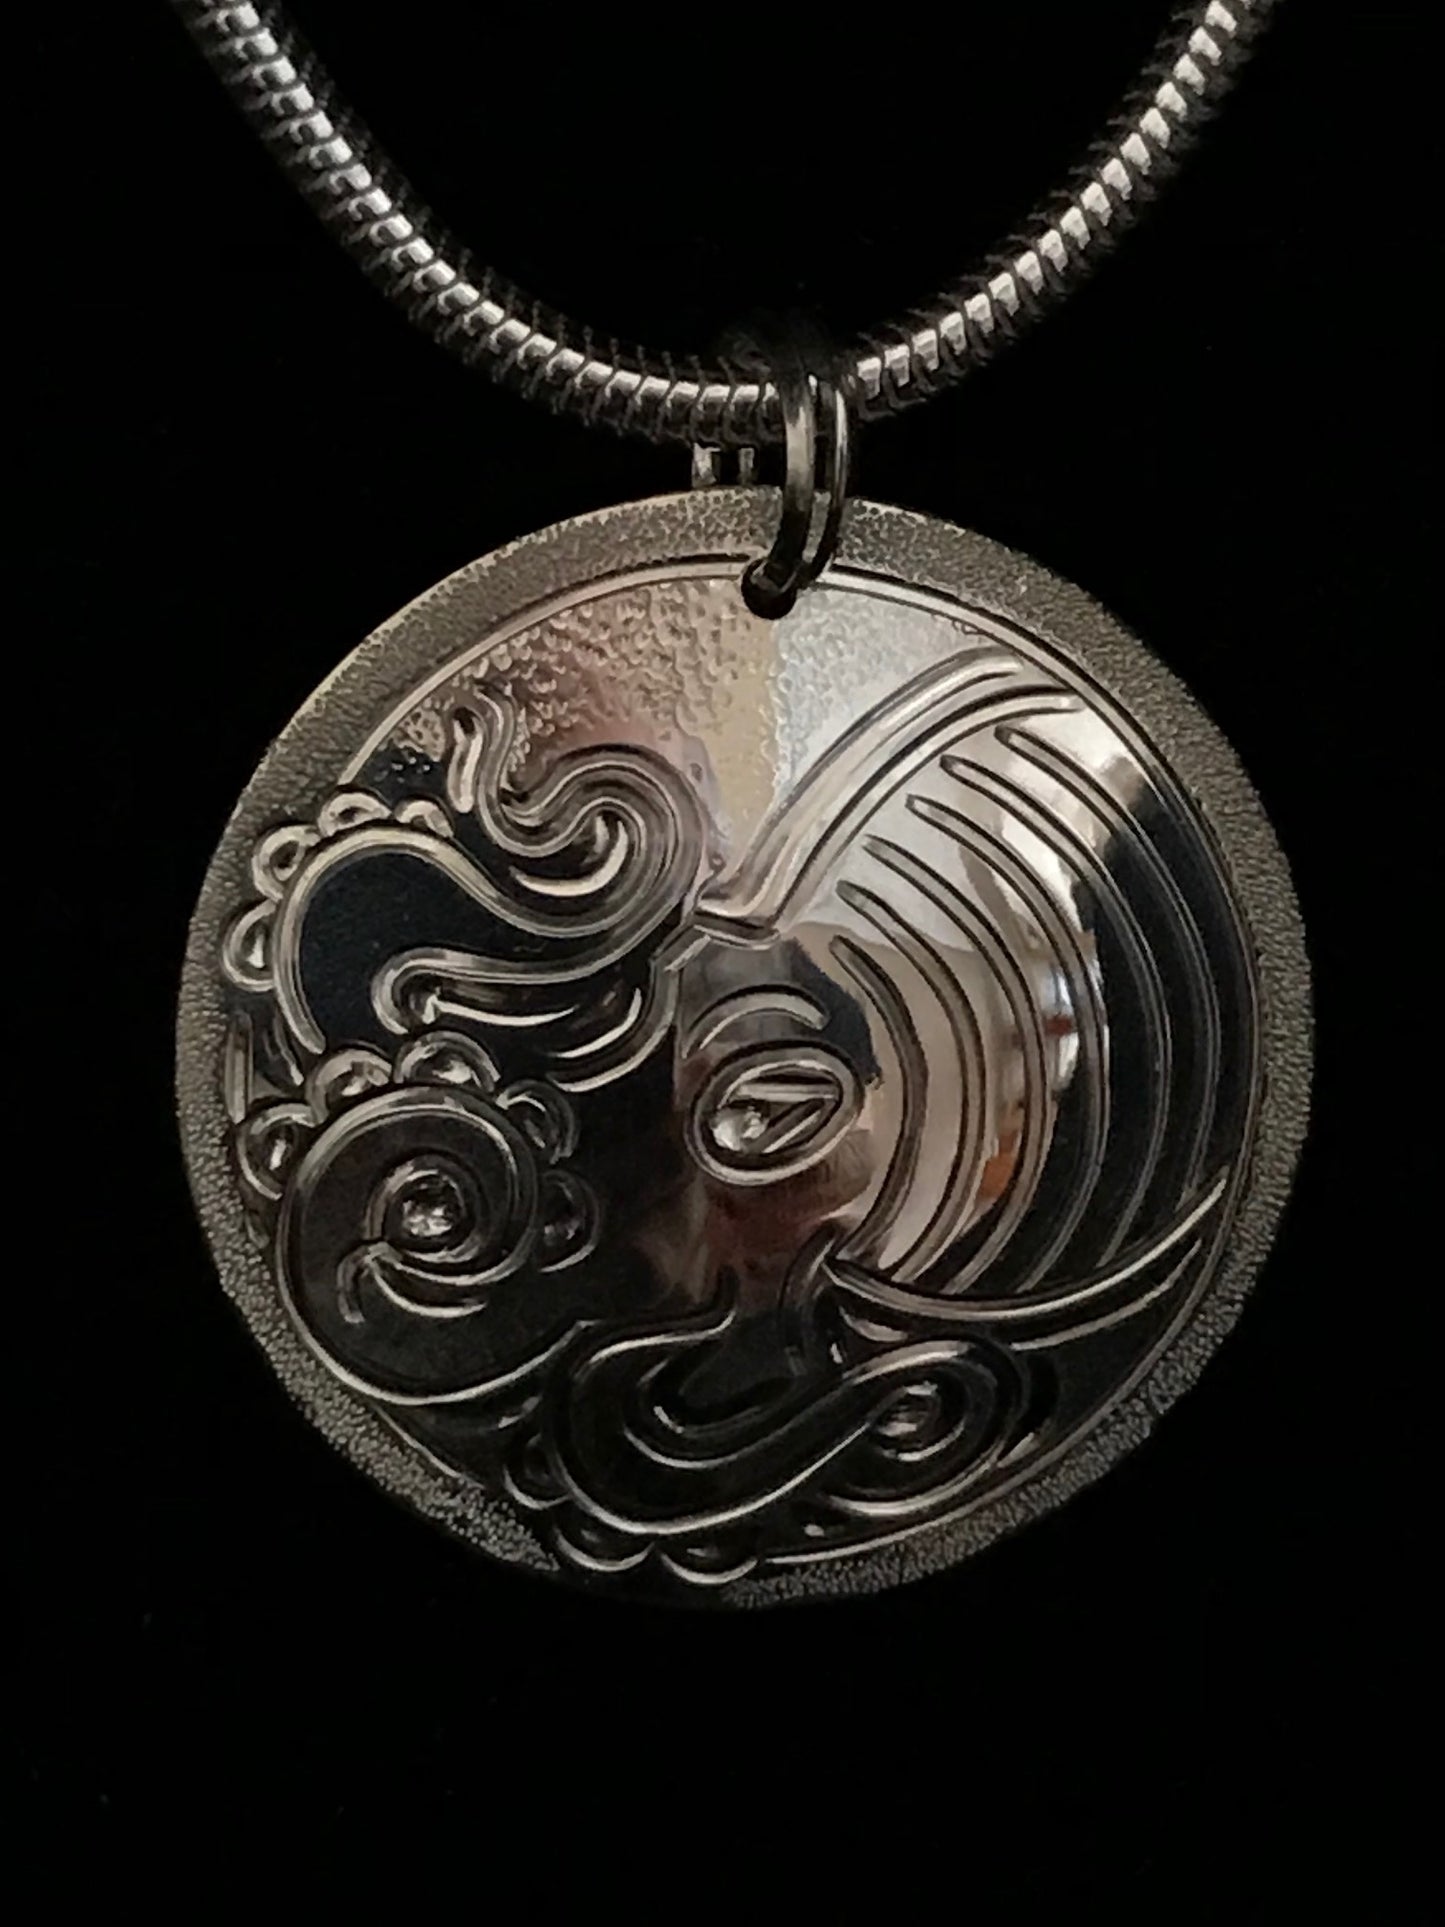 Octopus sterling silver pendant by island artisan jeweller Laura Dutheil.